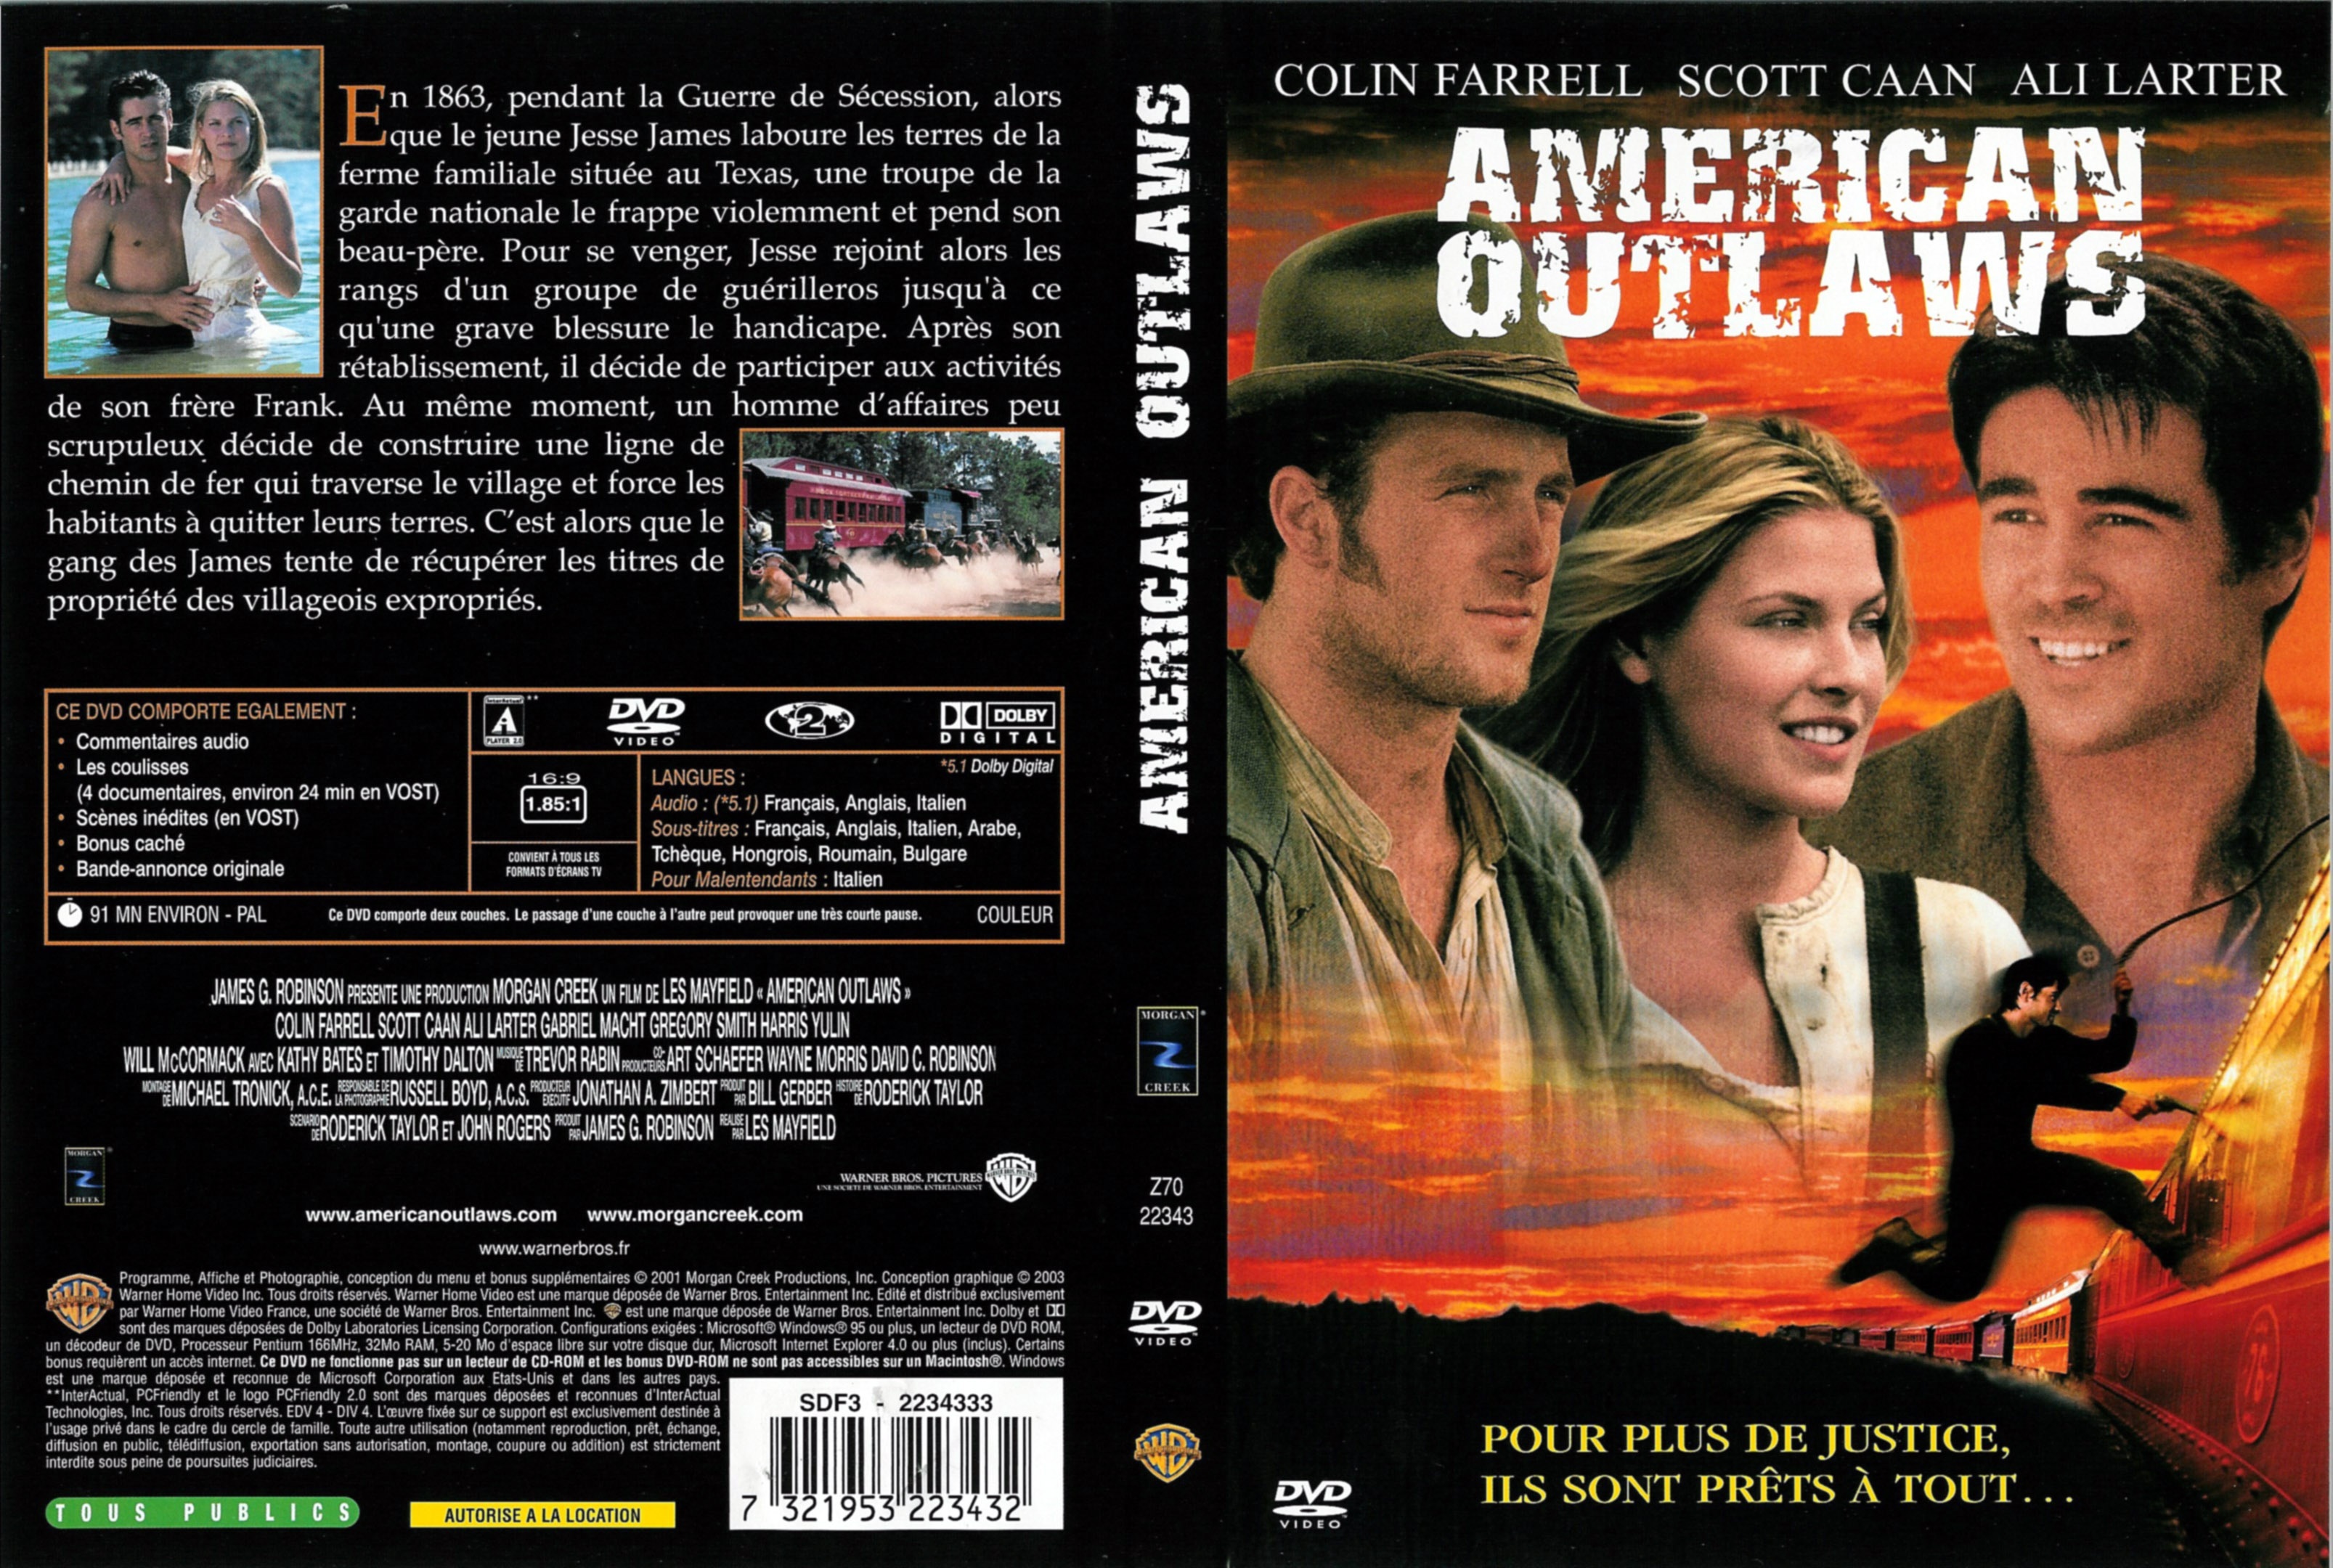 Jaquette DVD American Outlaws